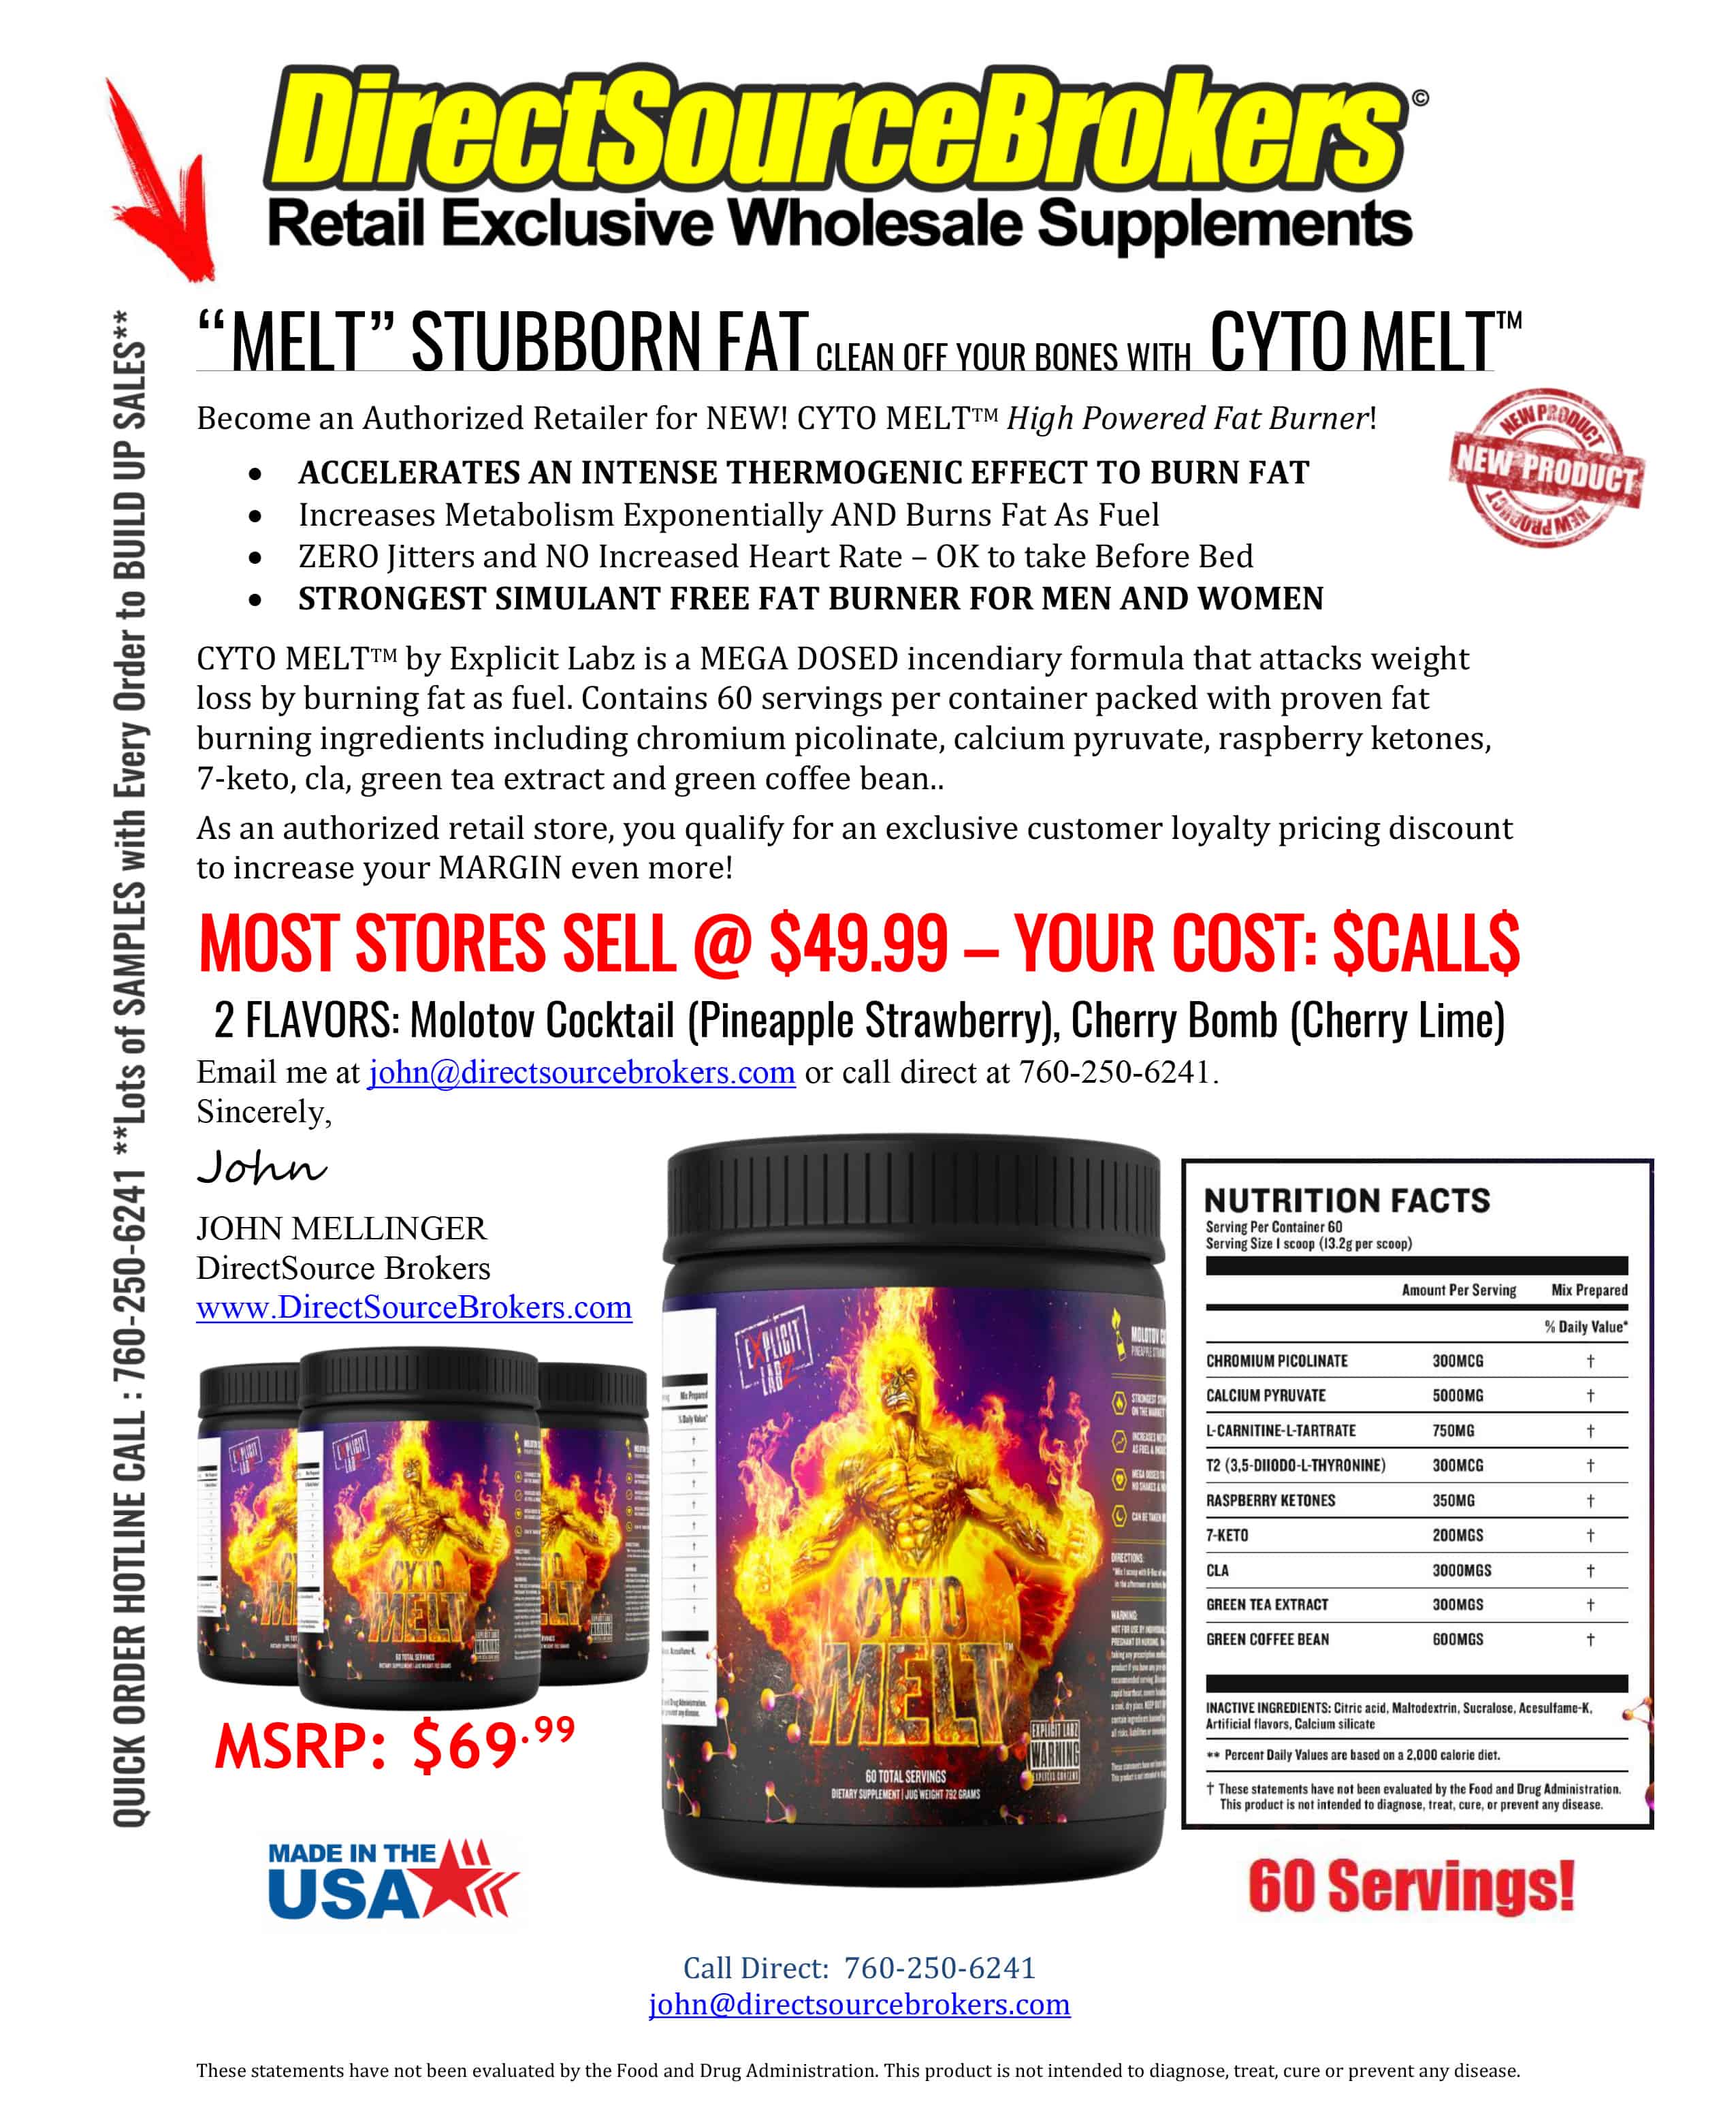 Buy CYTO MELT Wholesale for your Supplement Store